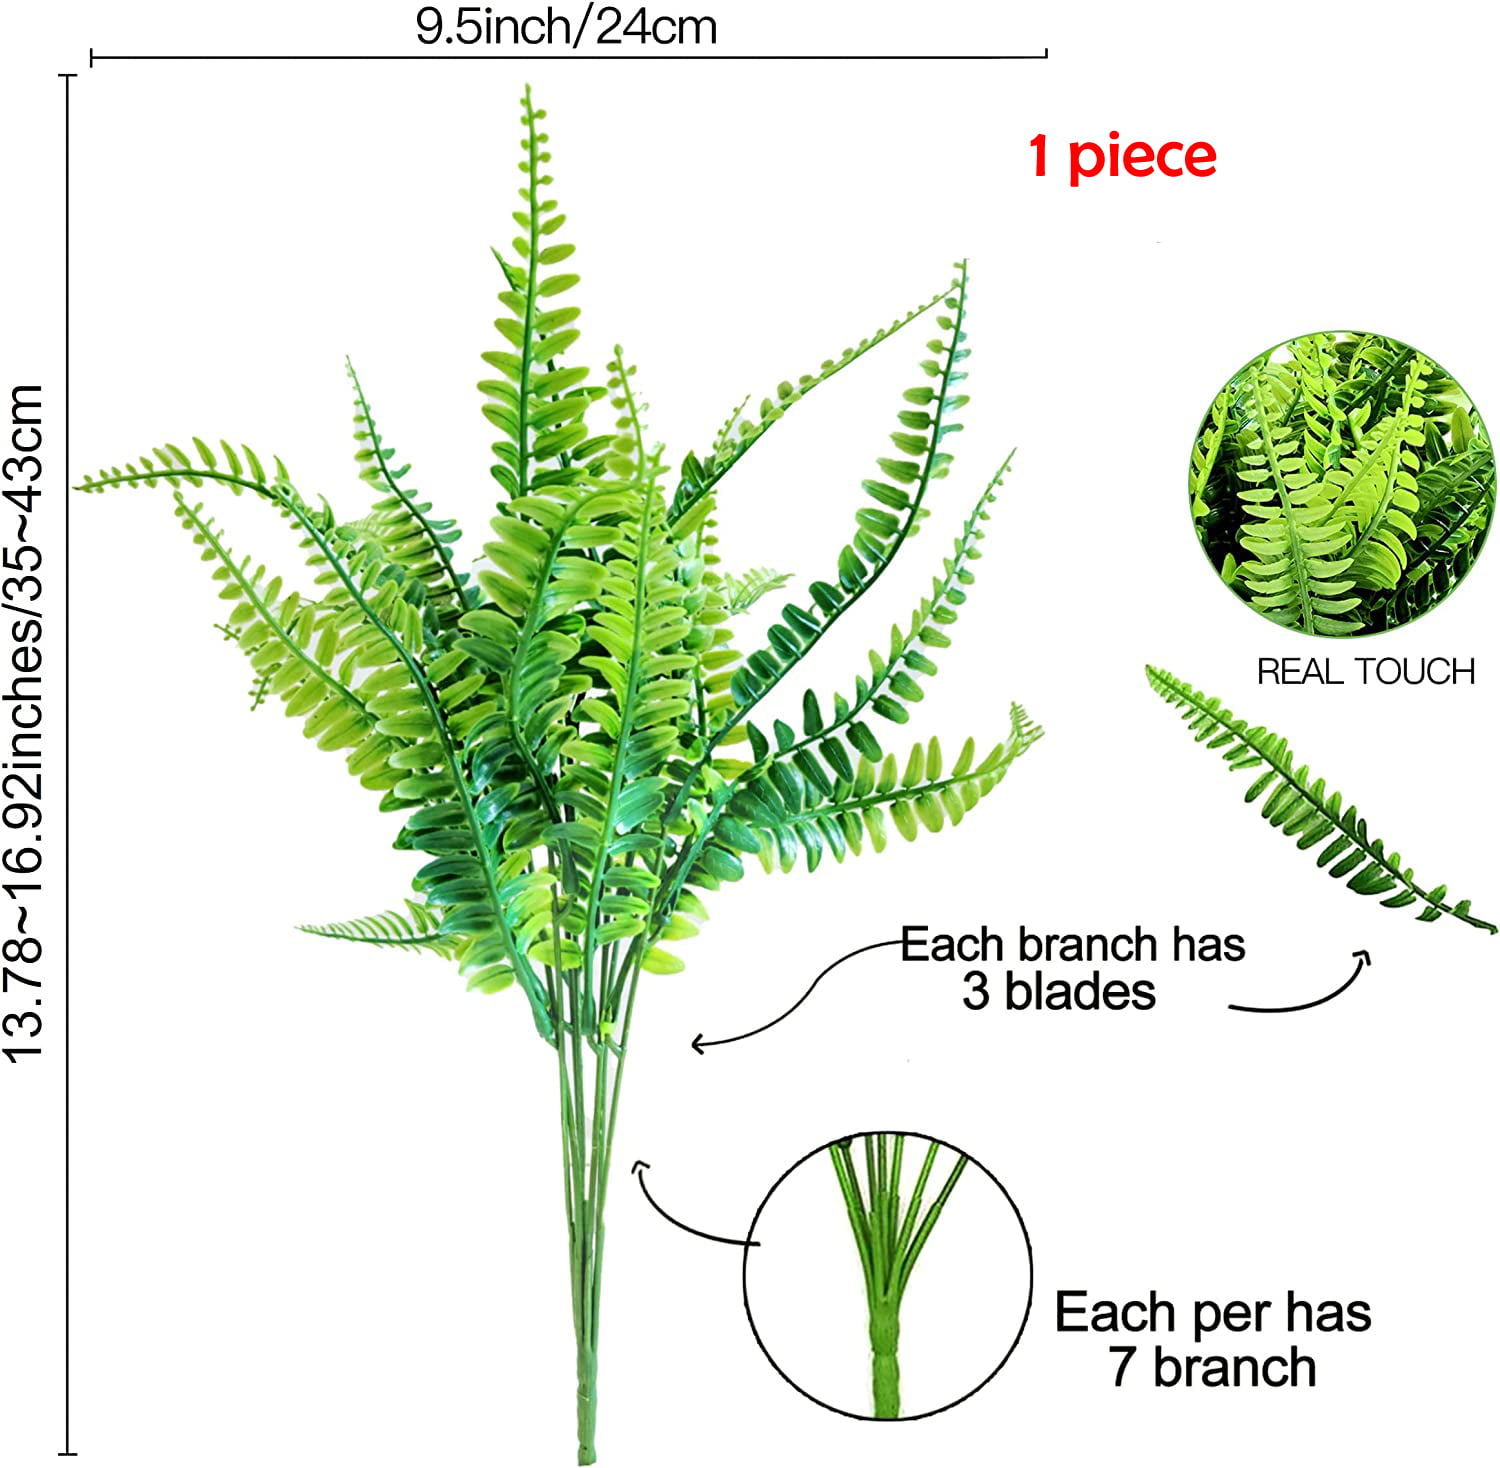 Zukuco 5pcs Artificial Ferns for Outdoors Fake Boston Fern Greenery Plants UV Resistant Plastic Plants Shrubs for Garden Front Porch Window Box Indoor